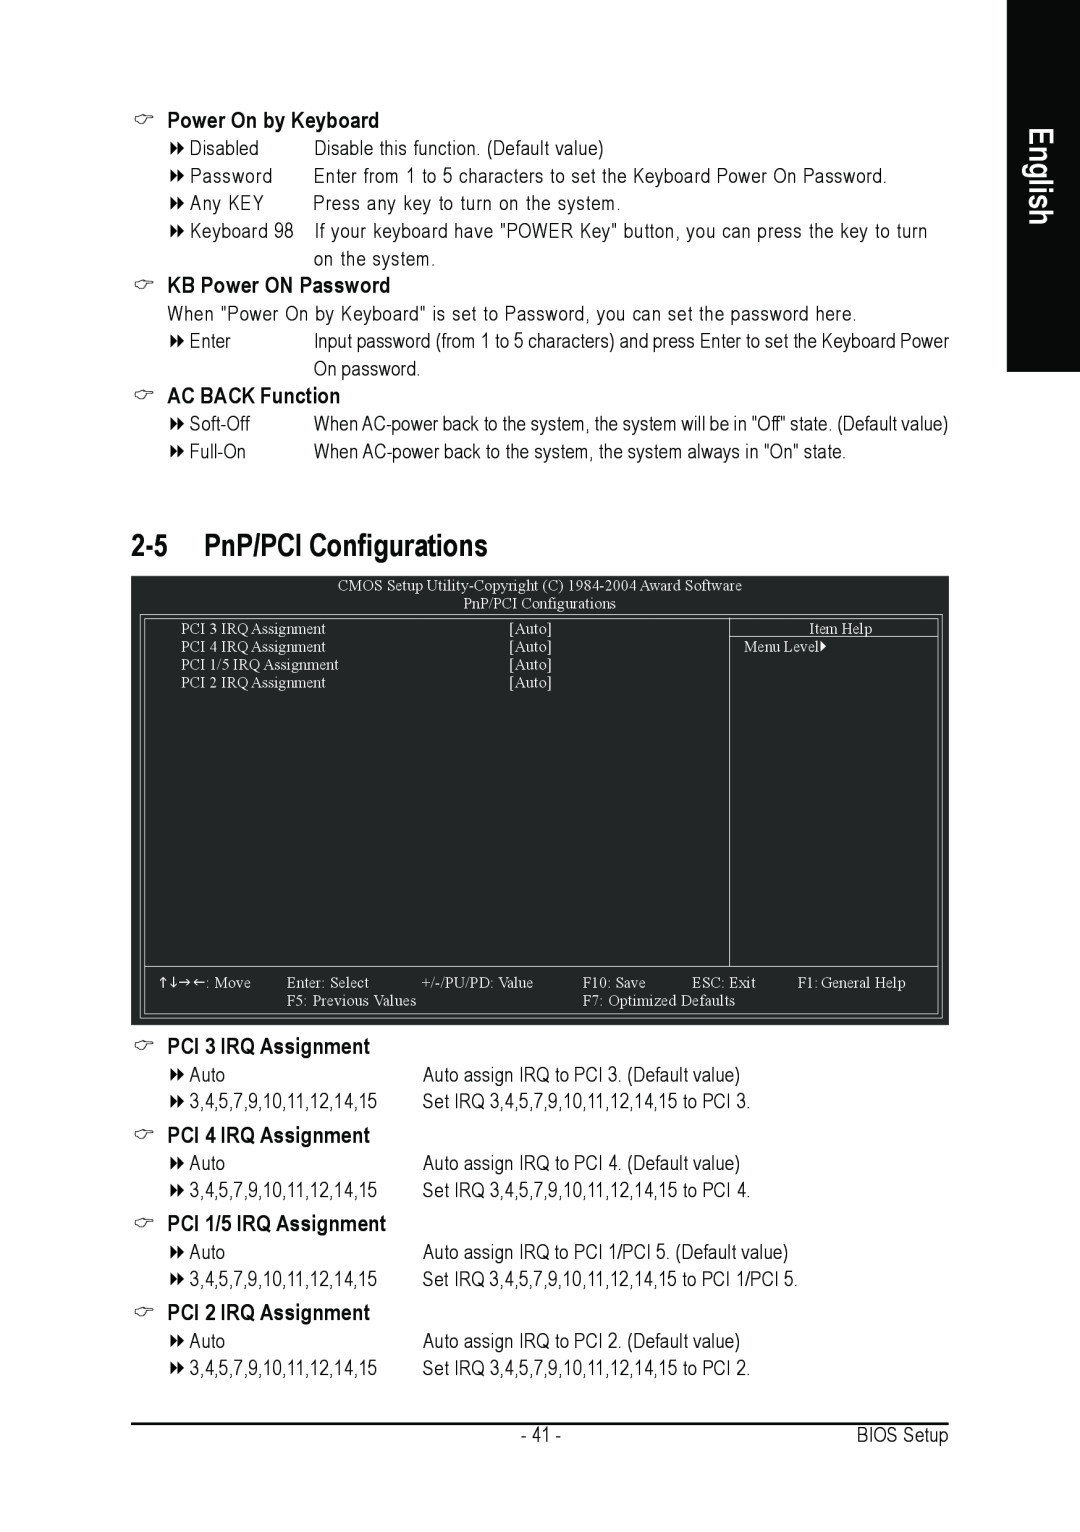 AMD GA-K8NSC-939 user manual PnP/PCI Configurations, Power On by Keyboard, KB Power ON Password, AC BACK Function, English 